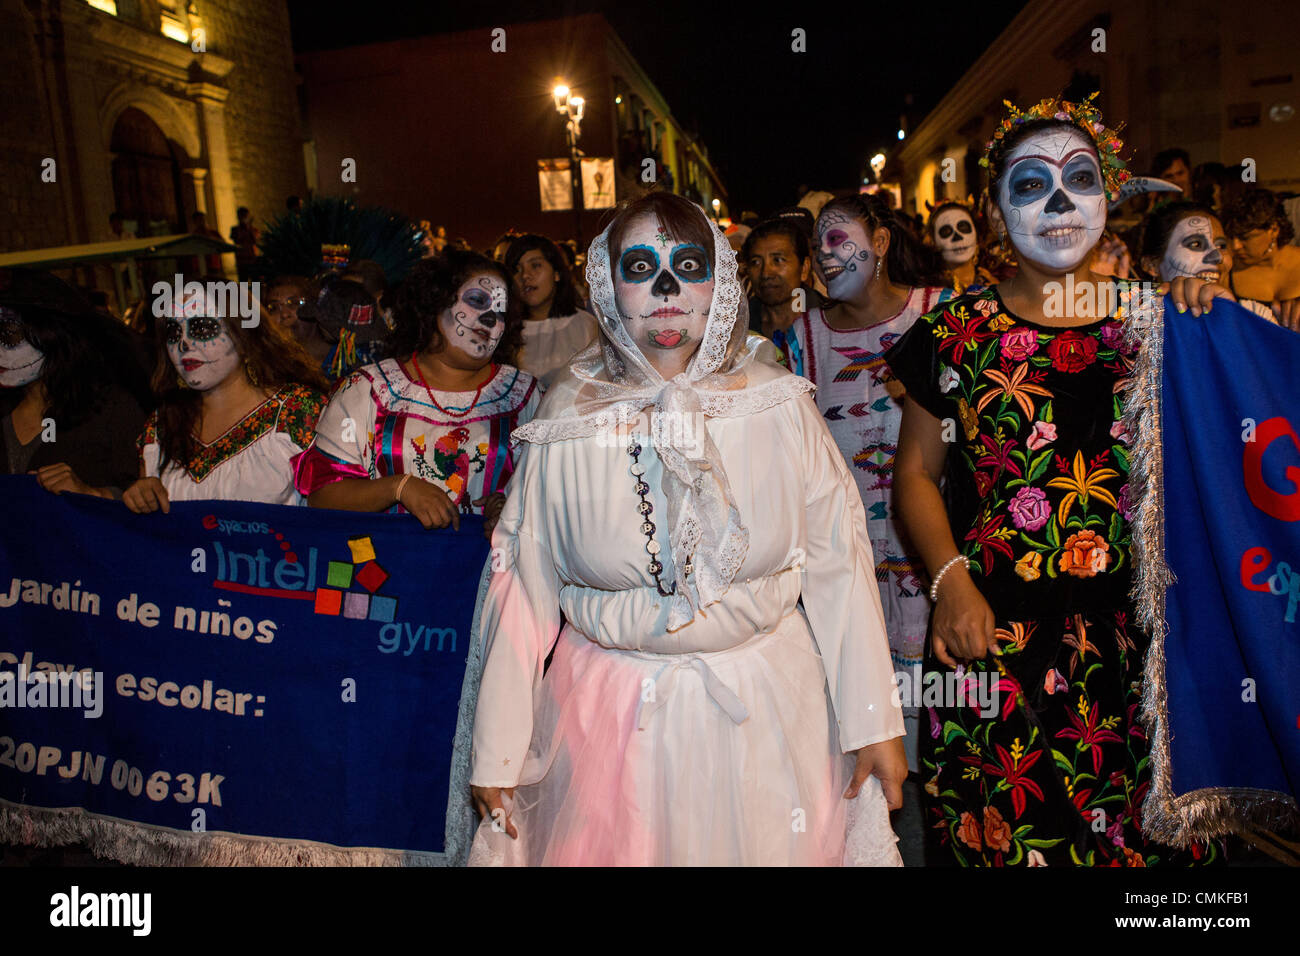 Revelers dressed in costume parade through the streets dressed in costumes during the Day of the Dead Festival known in spanish as D’a de Muertos on November 1, 2013 in Oaxaca, Mexico. Stock Photo